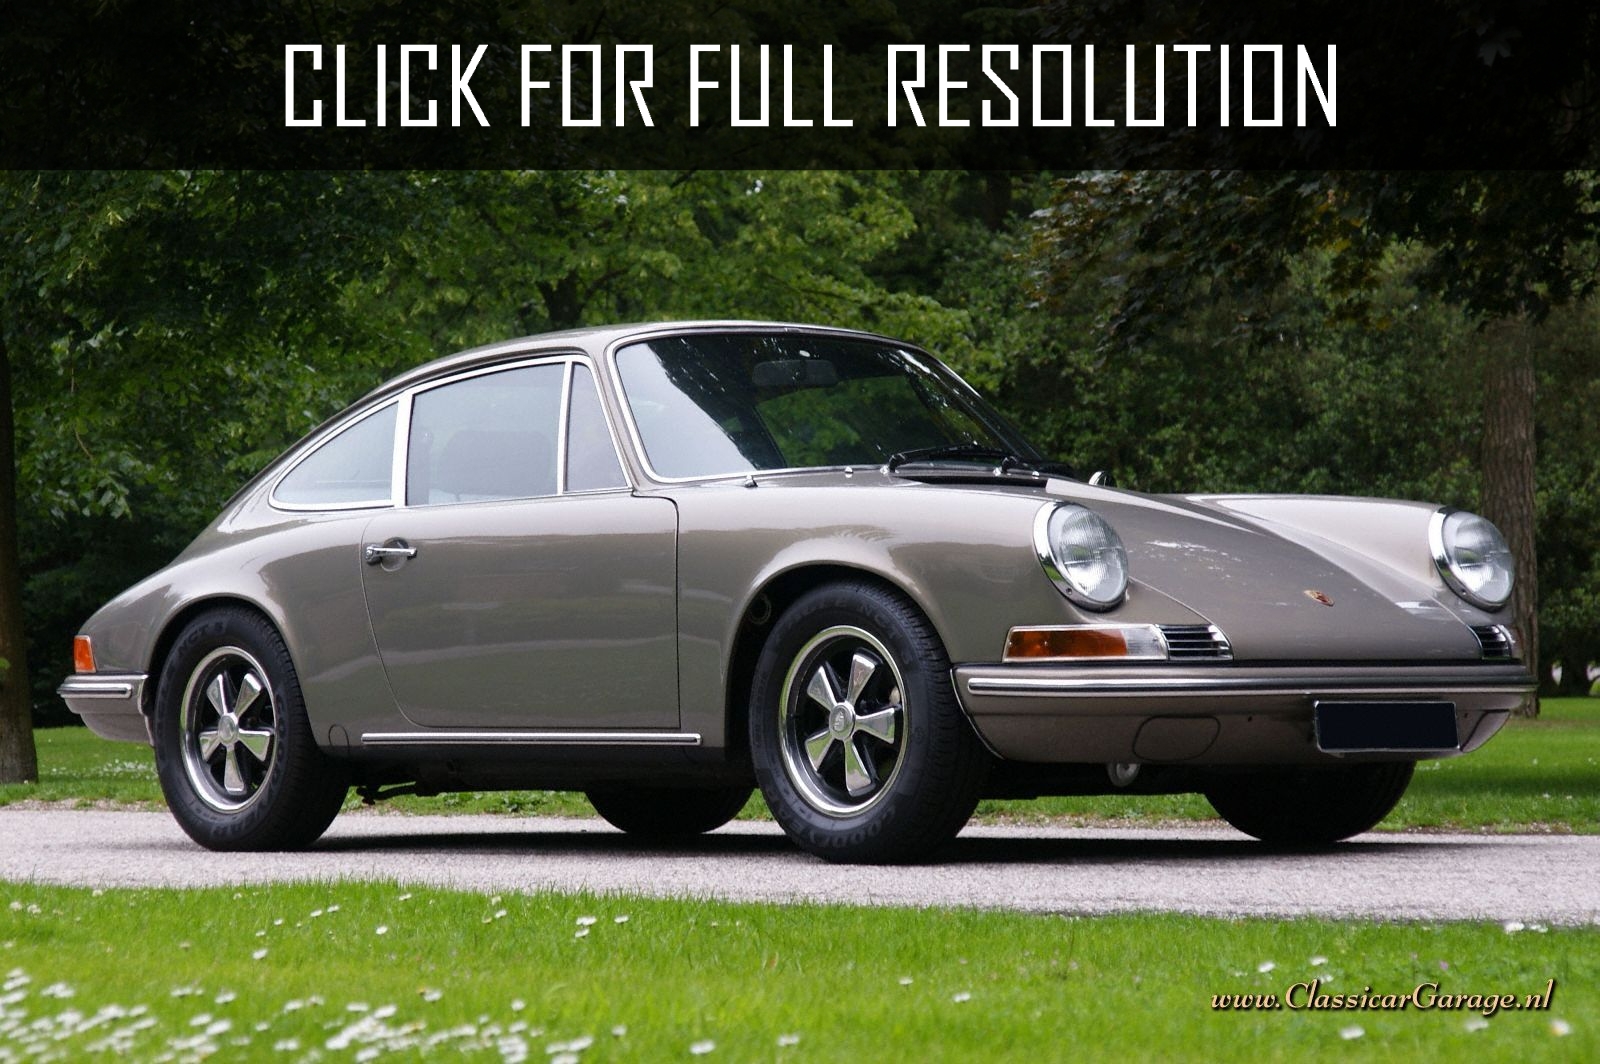 1970 Porsche 911 Turbo news, reviews, msrp, ratings with